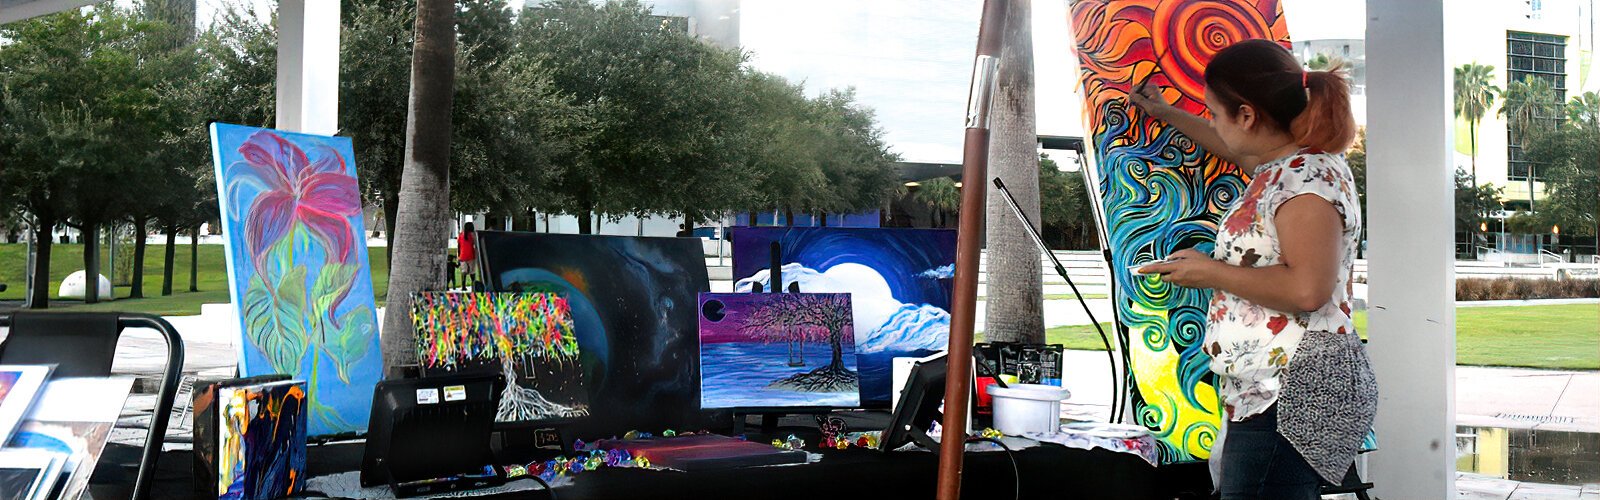 Artist Crystaline Rojas of A Splash Of Passion Art contributes to the event at Curtis Hixon Park by creating a new artwork.